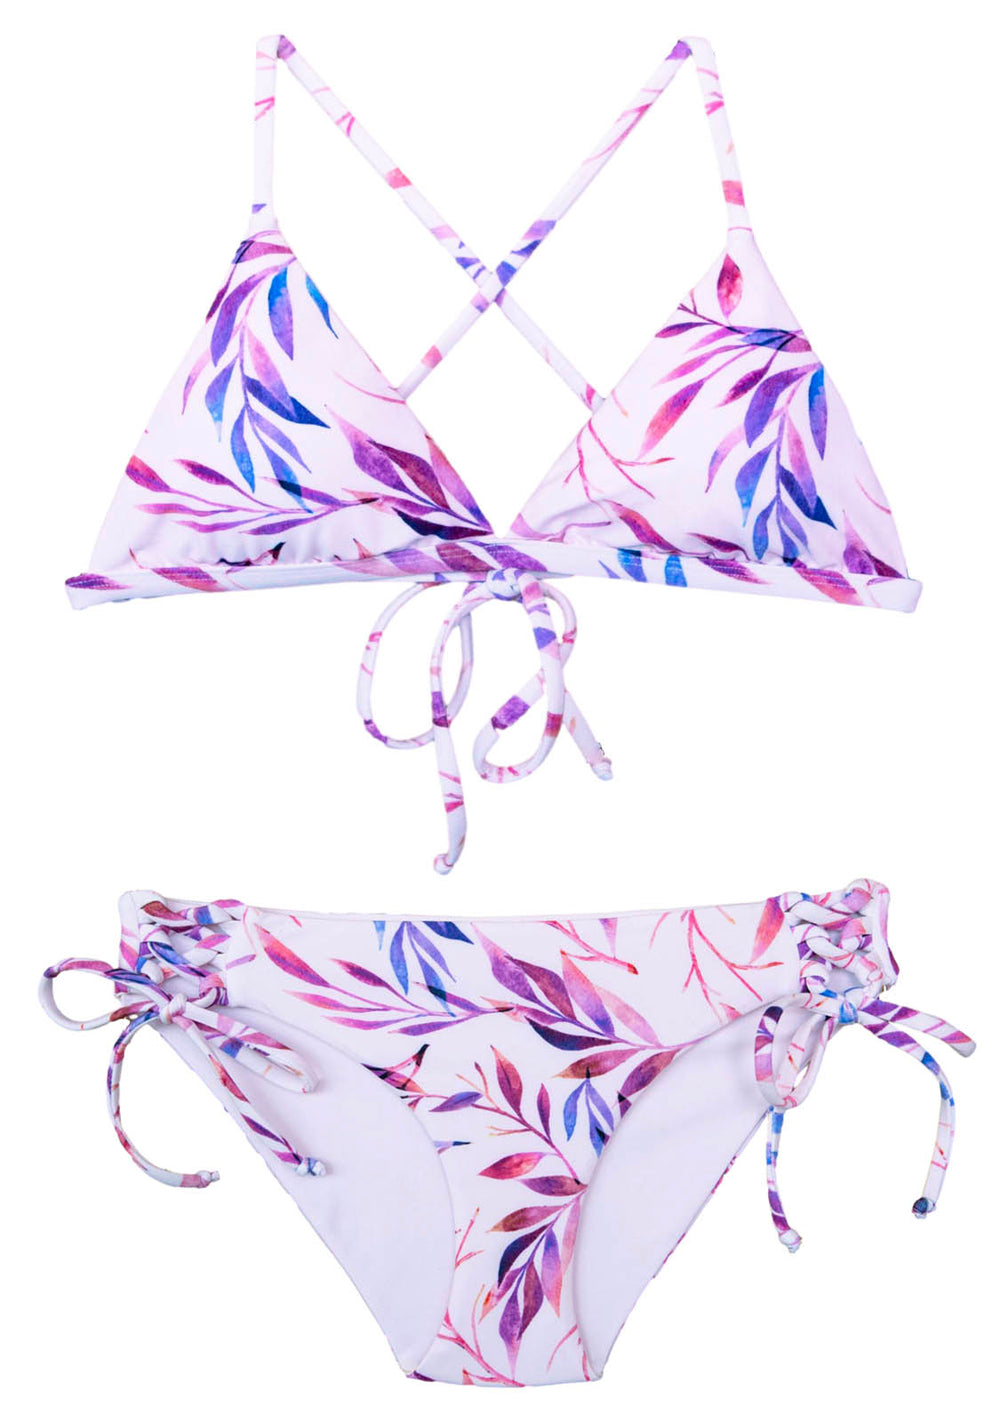 Flaunt your style with this cutting edge Pink Floral two-way swimsuit